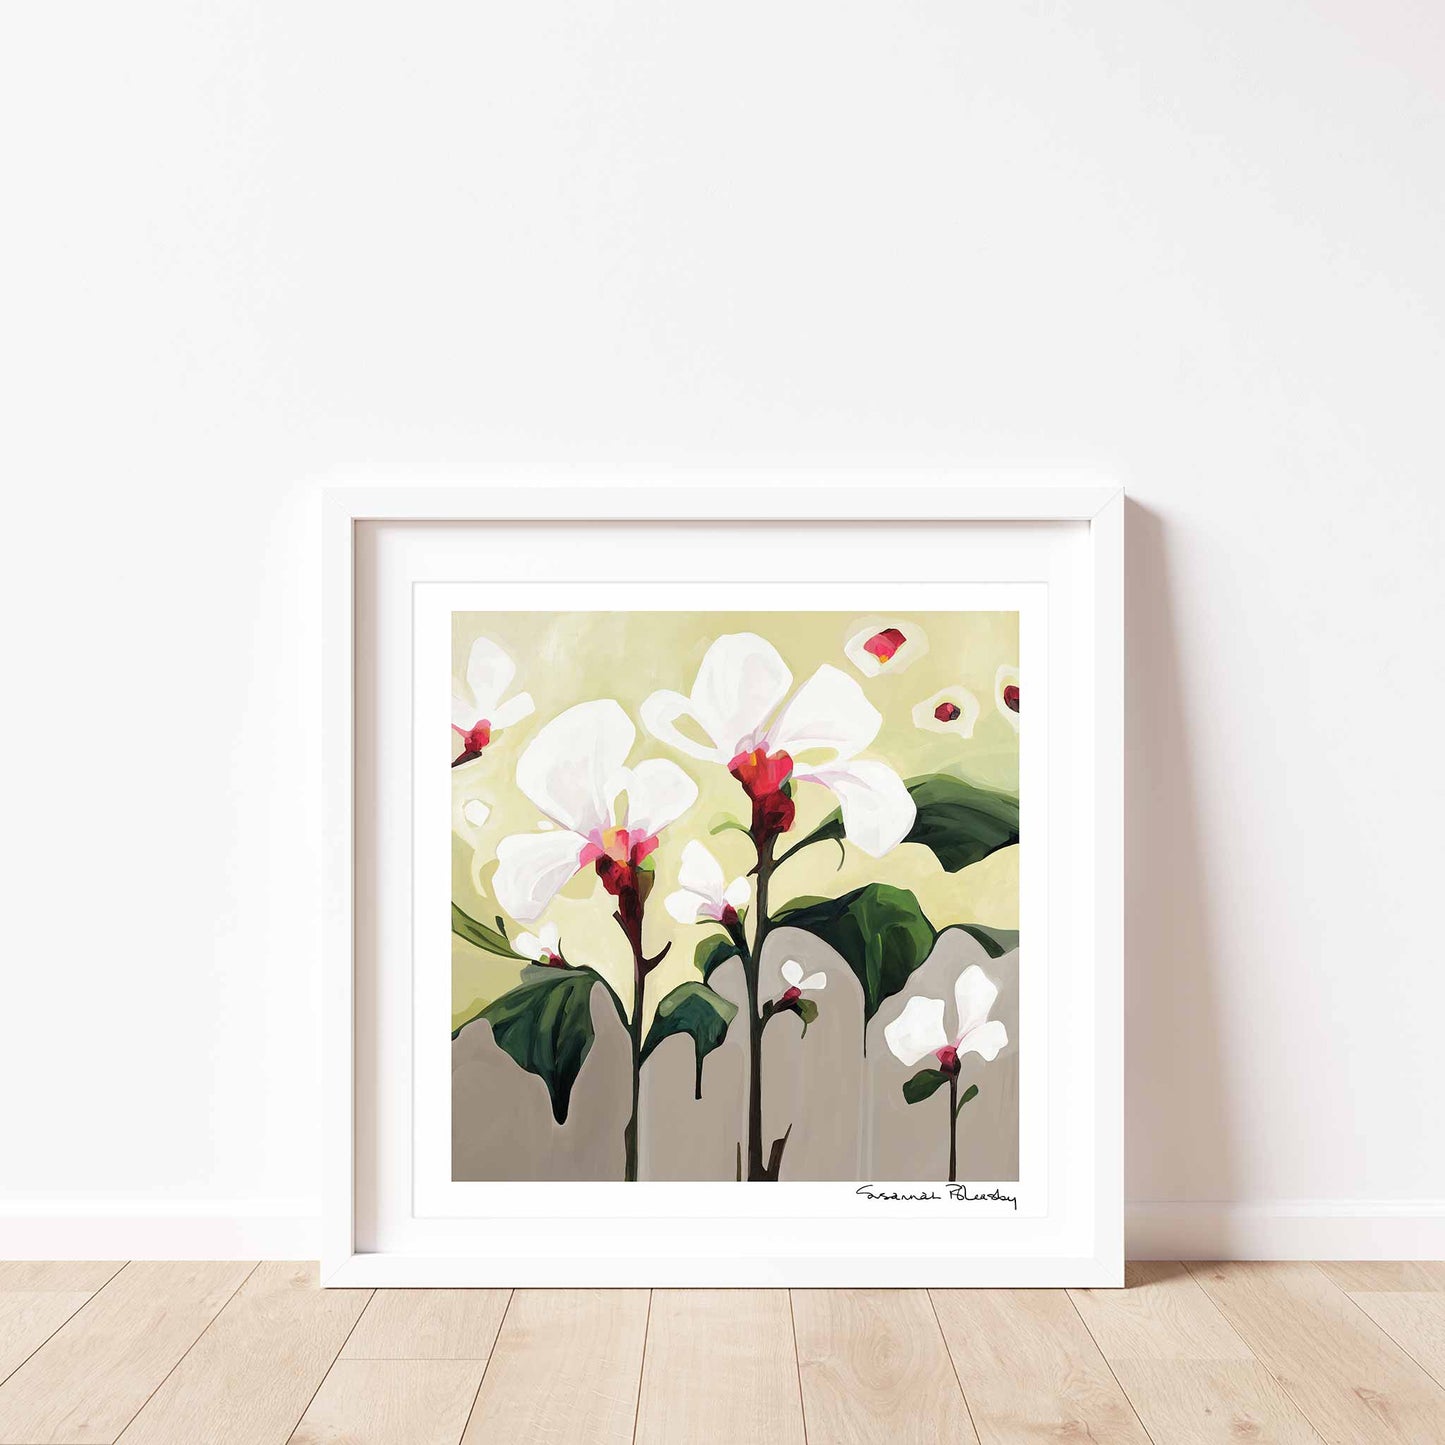 abstract floral artwork 12x12 fine art print of white flowers